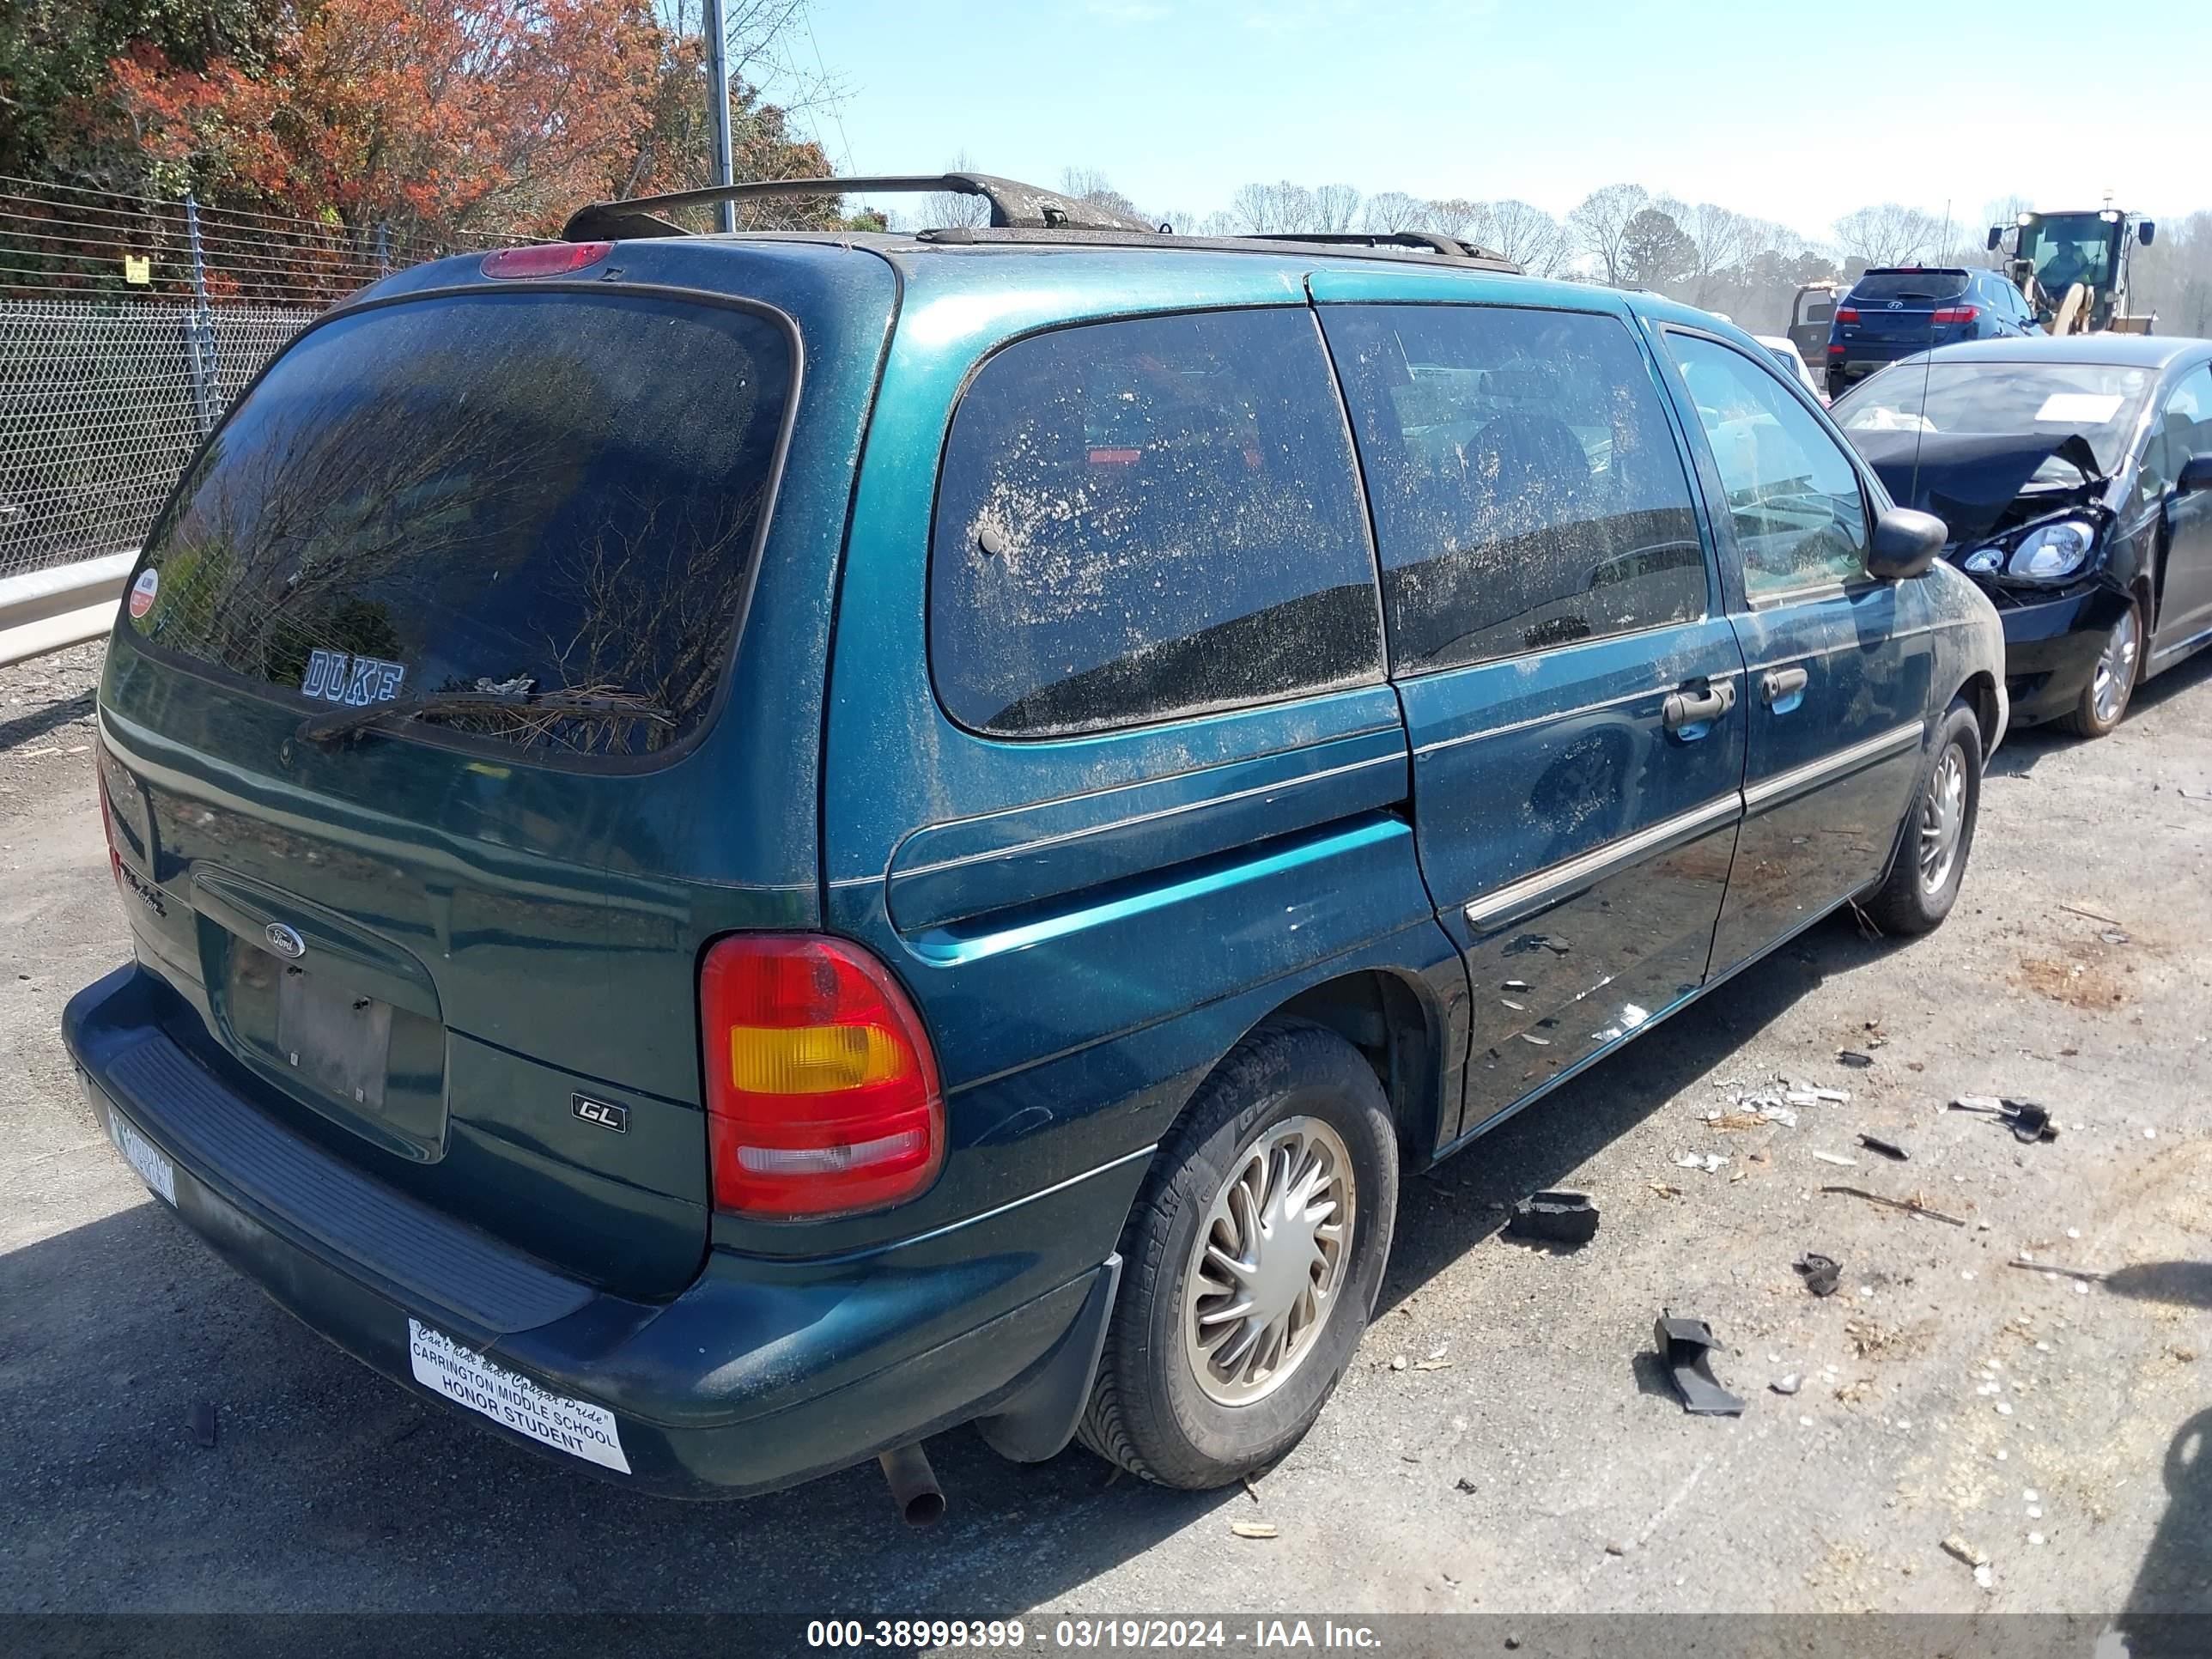 2FMZA5145WBE21153  - FORD WINDSTAR  1998 IMG - 3